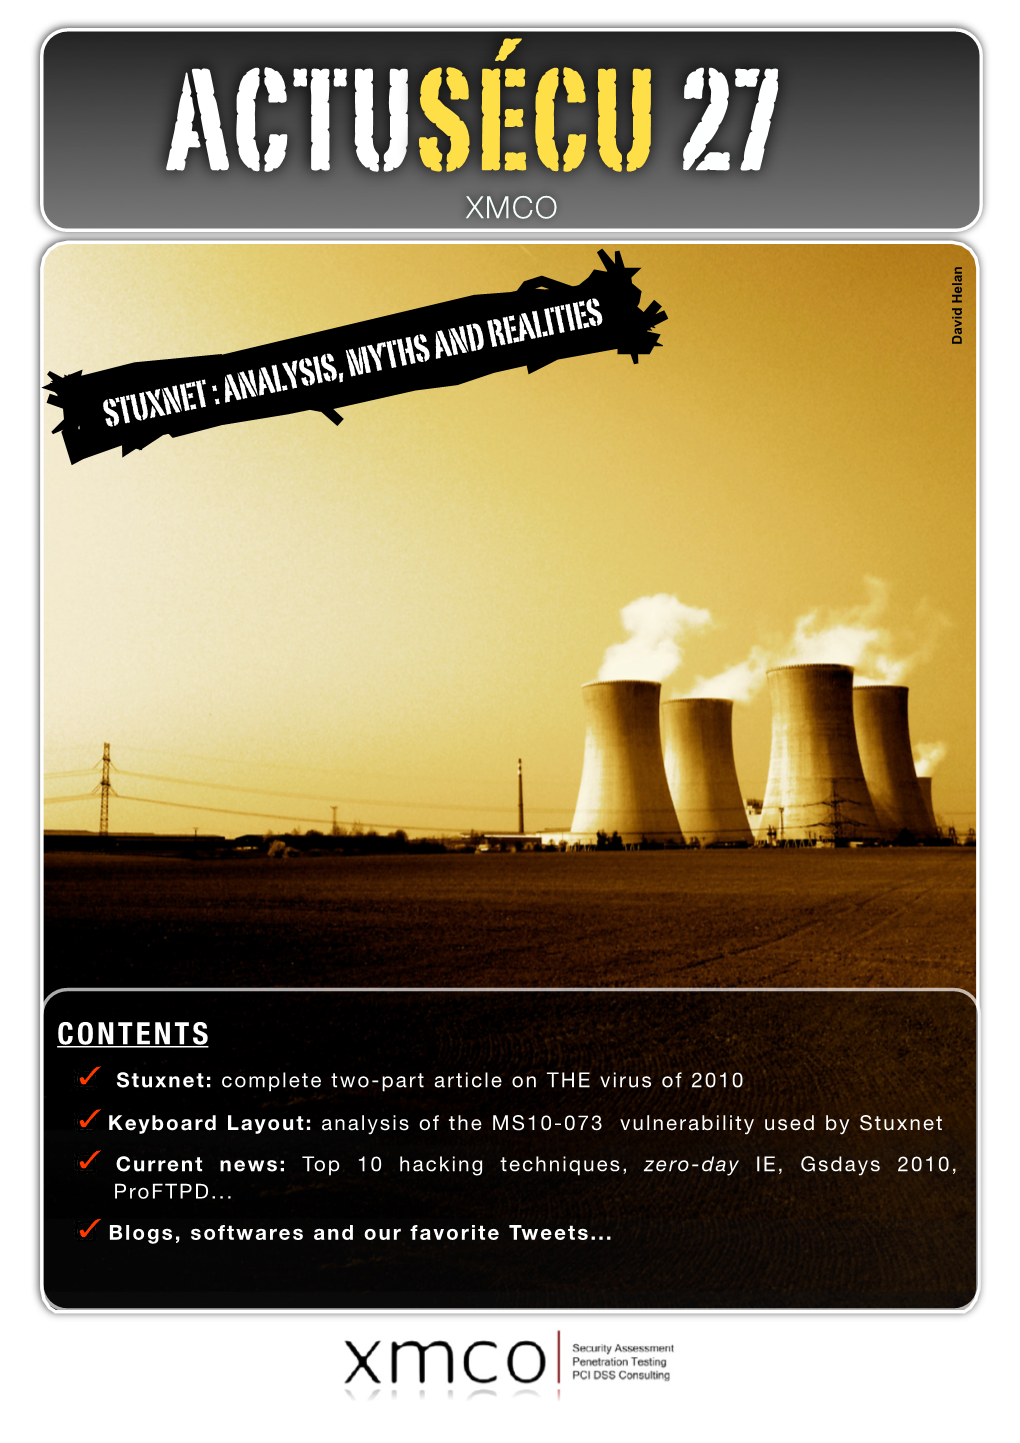 Stuxnet : Analysis, Myths and Realities